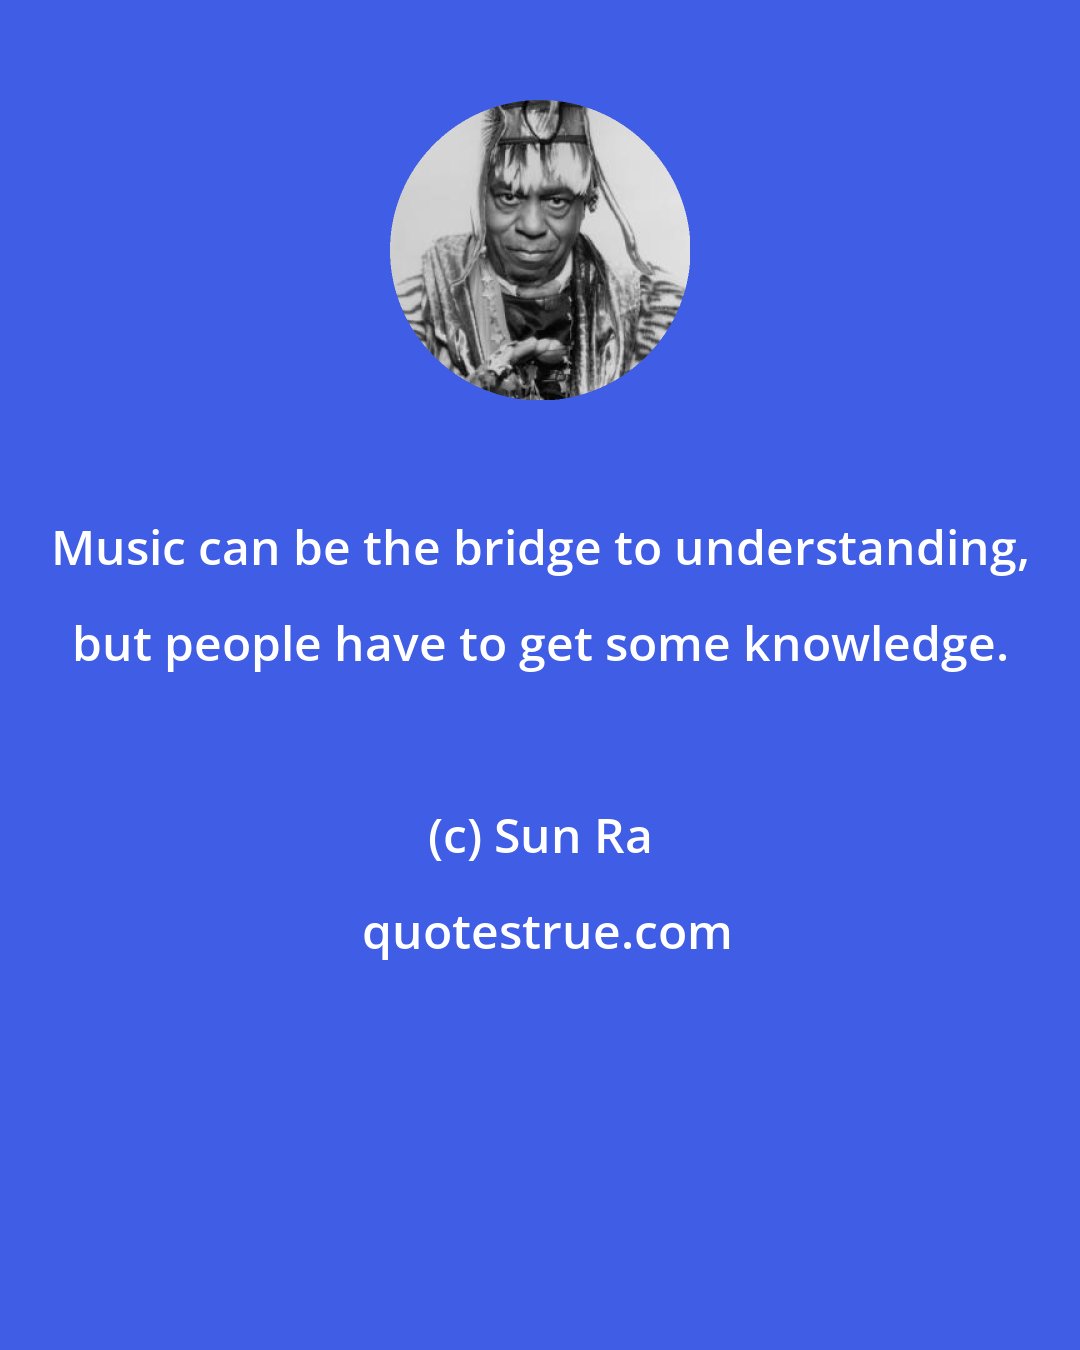 Sun Ra: Music can be the bridge to understanding, but people have to get some knowledge.